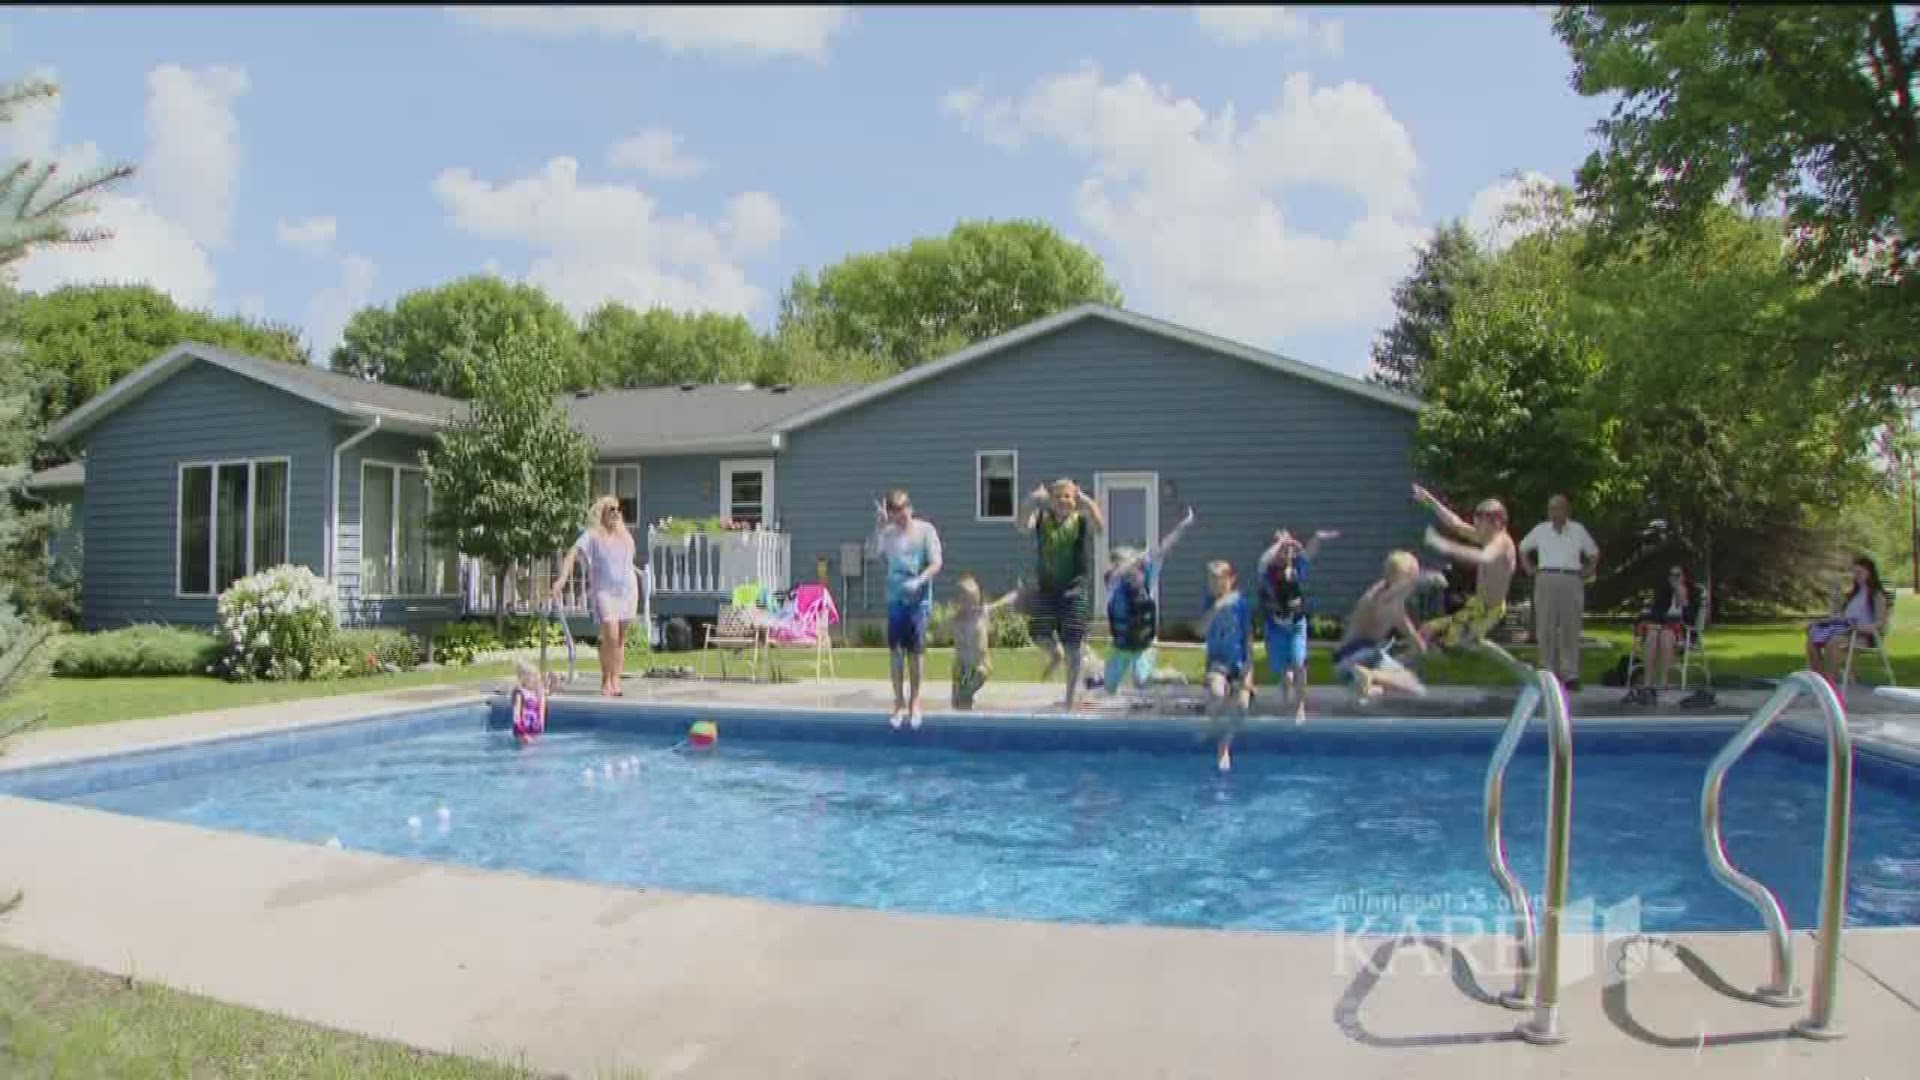 Lonely after the death of his wife, Keith Davison has filled his yard with children by installing a pool. Davison's backyard addition is no mere wading pool, at 32 feet long - and 9 feet deep under the diving board. http://kare11.tv/2vTeBoY